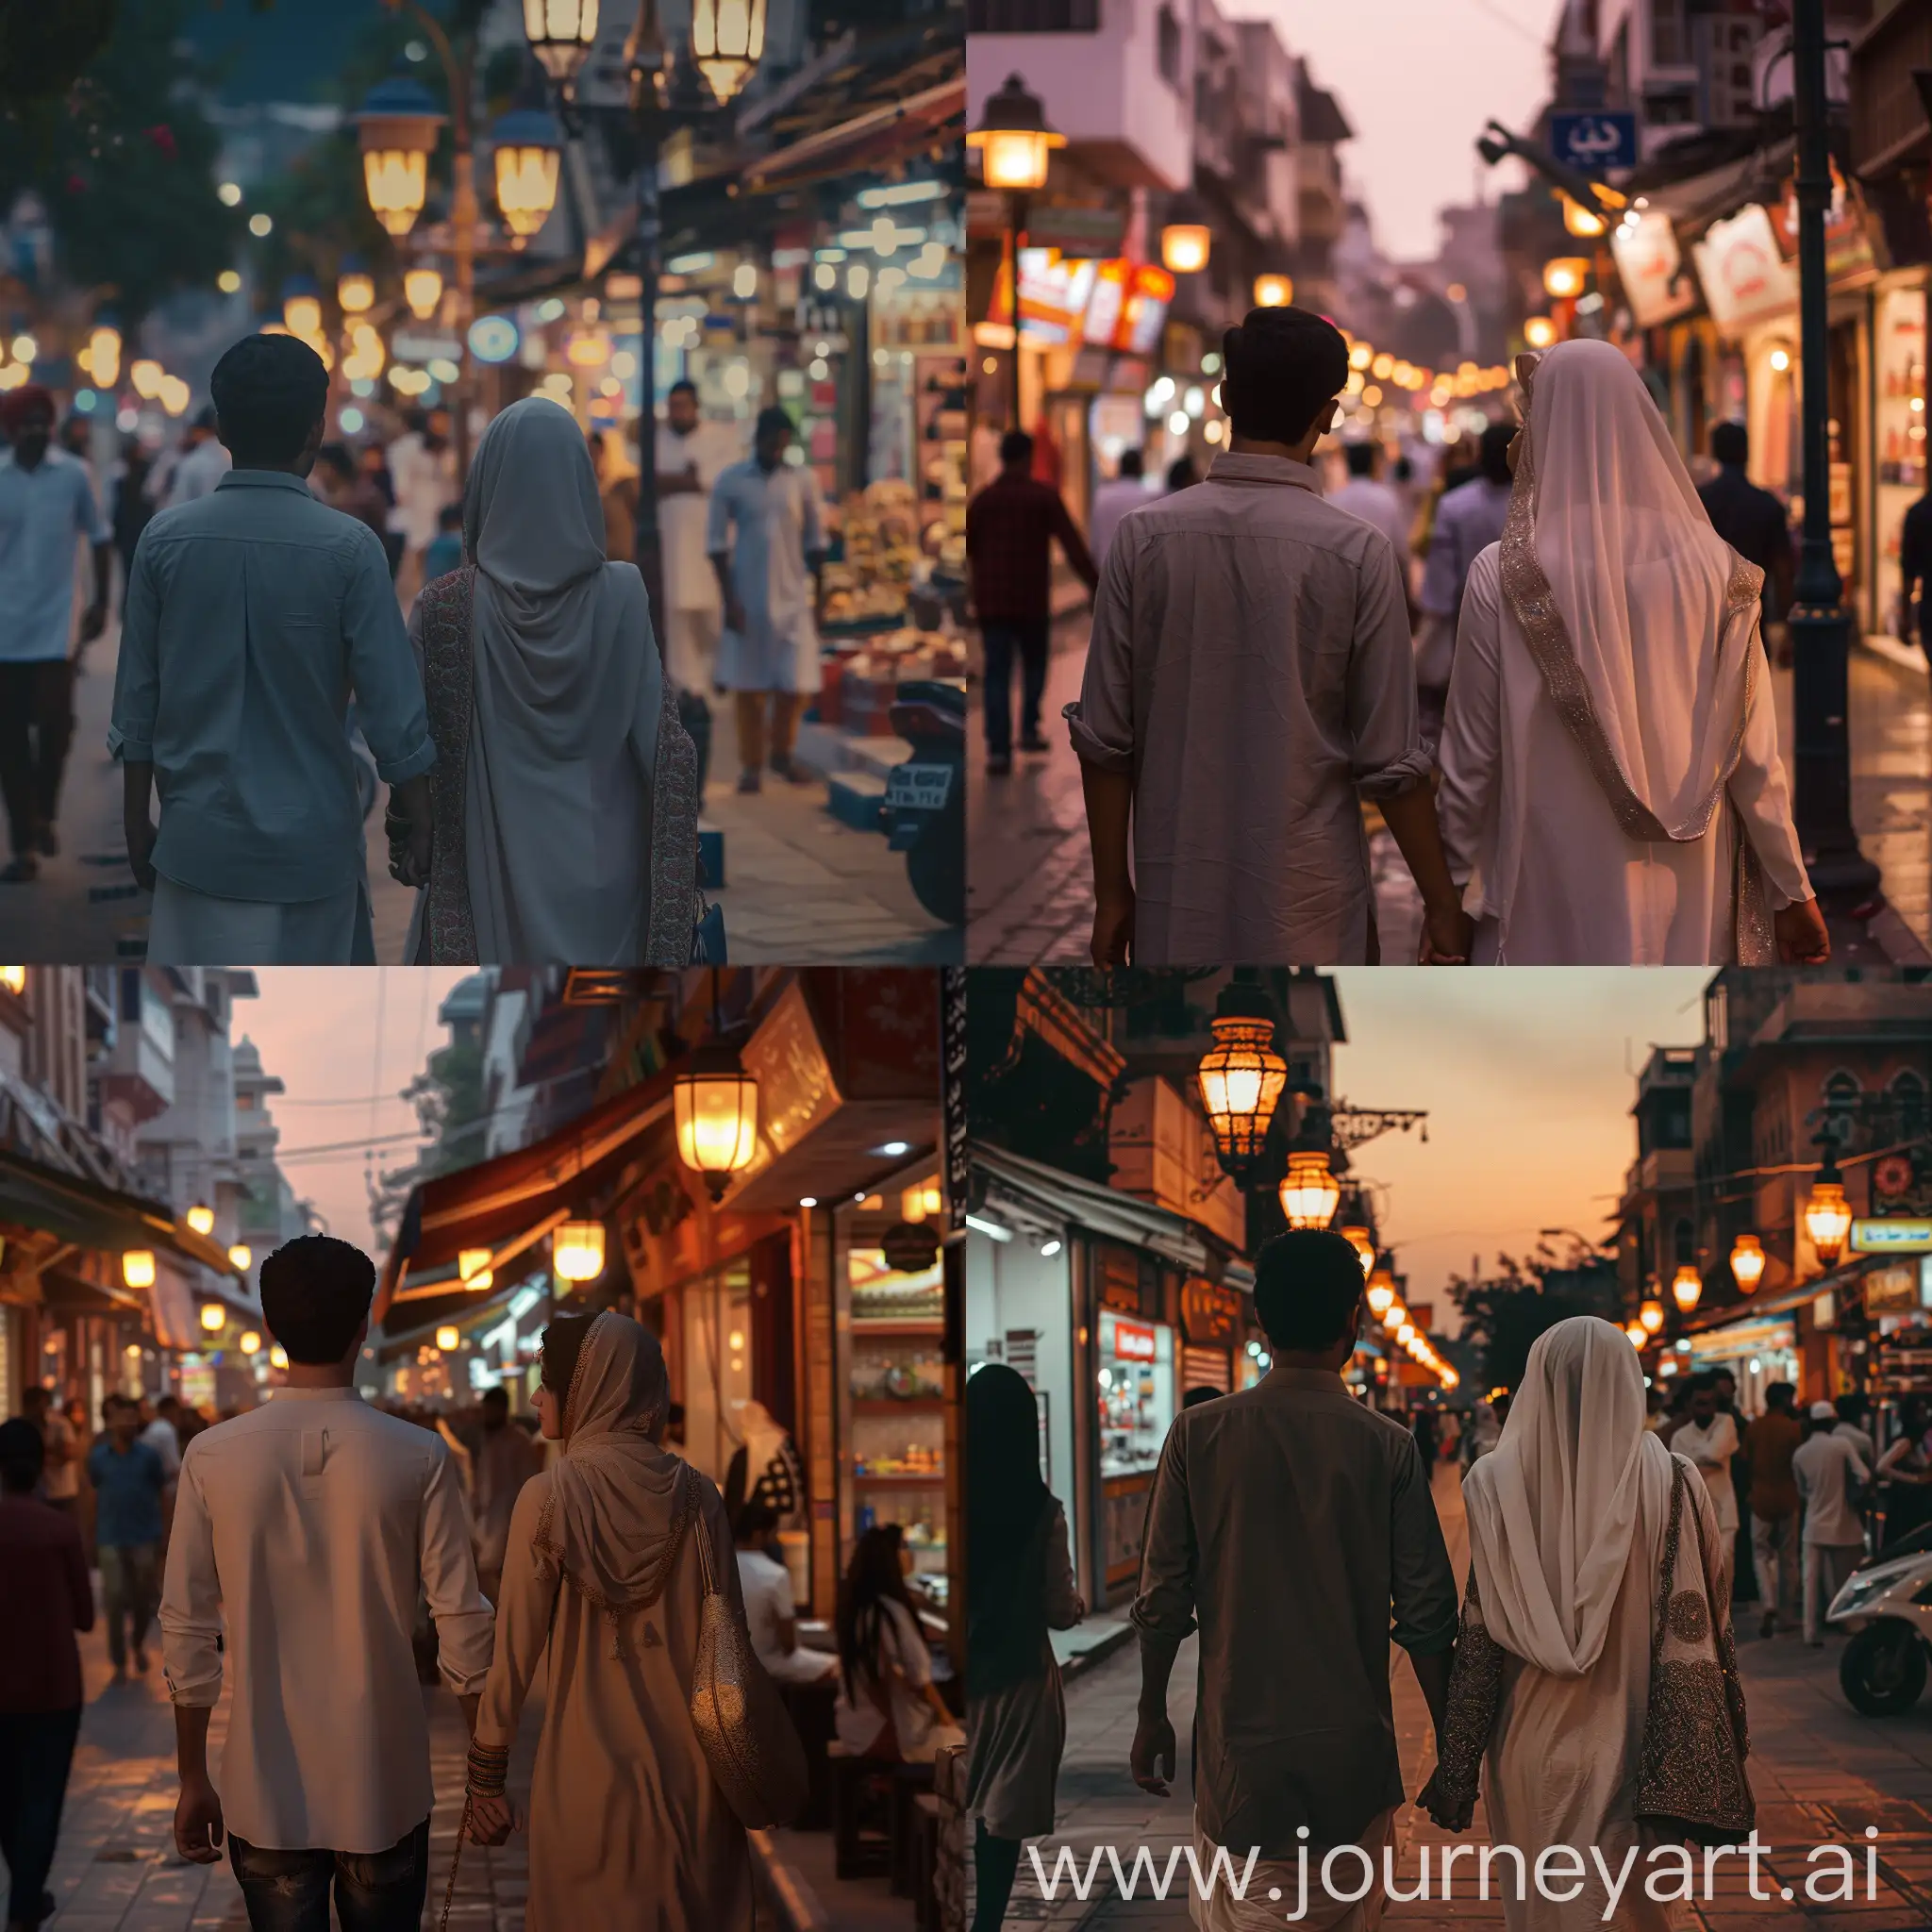 A photorealistic digital photo of a young Indian Muslim couple on their honeymoon, strolling hand-in-hand along a bustling street in India after sunset. The image should be captured from behind, showing their back portraits as they walk together down the crowded sidewalk. Their faces should be visible in profile, gazing ahead of them rather than at the camera. The scene should depict the lively atmosphere of the city street at dusk, with warm lighting from street lamps and storefronts illuminating the scene. The couple's clothing and accessories should reflect their cultural and religious backgrounds as an Indian Muslim couple. The overall style should emulate a skilled photographer's capture of a candid, natural moment during their honeymoon travels.

Some key elements to include:

Photorealistic digital photo style
Back portrait view of the couple walking together
Faces in profile, looking forward, not at camera
Bustling Indian city street after sunset
Warm lighting from lamps/storefronts
Clothing/accessories reflecting Indian Muslim culture
Candid, natural feeling honeymoon moment